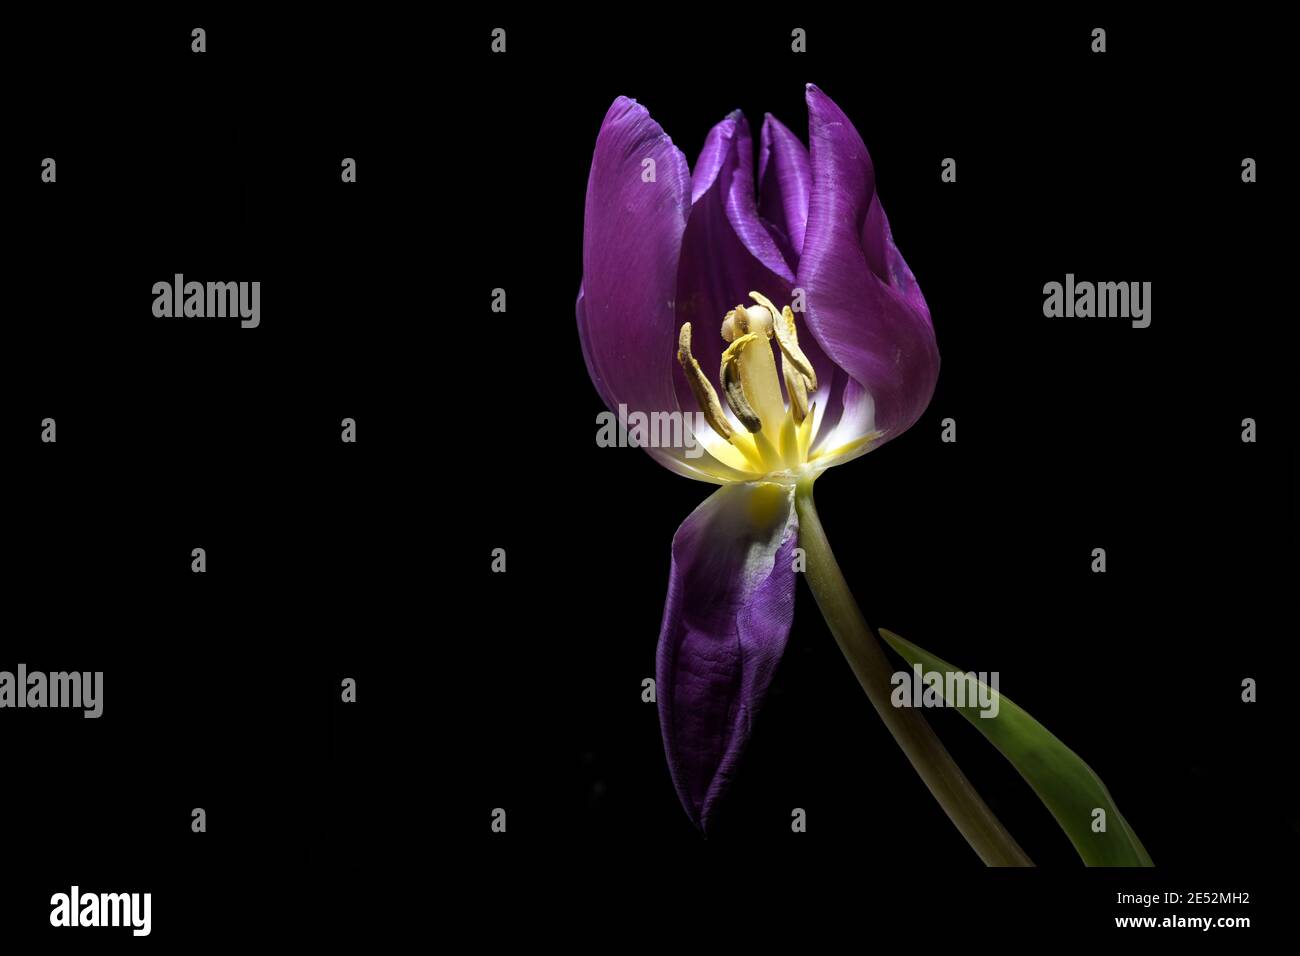 Purple tulip flower with visible yellow stamen and pistil isolated on a black background, copy space, selected focus, narrow depth of field Stock Photo